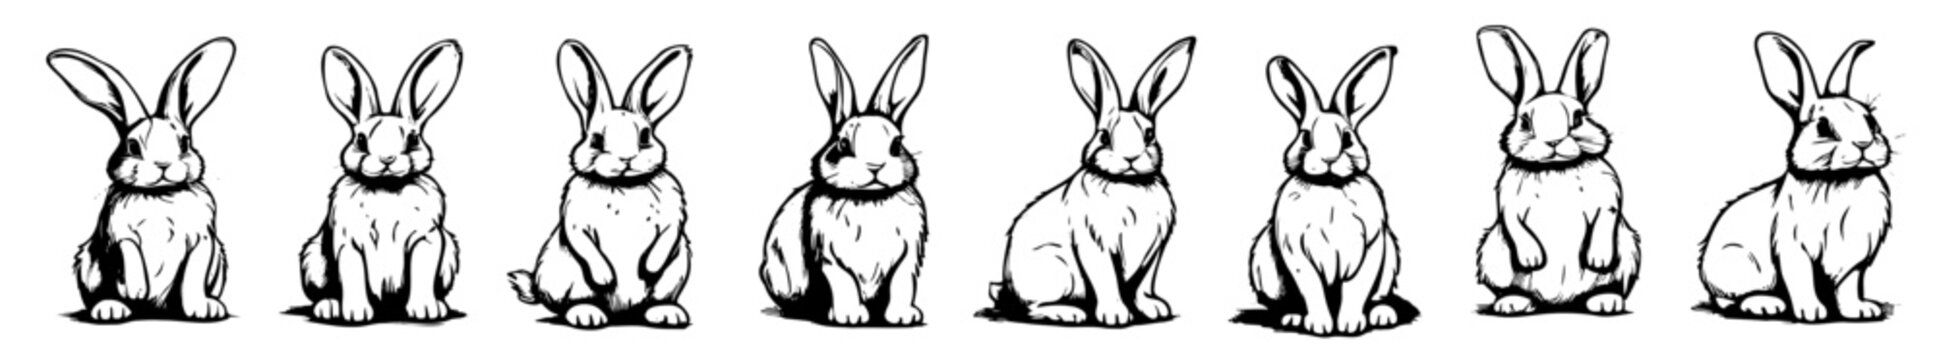 Set different rabbits silhouettes, isolated on background for design use. Bunnies as decorative elements.